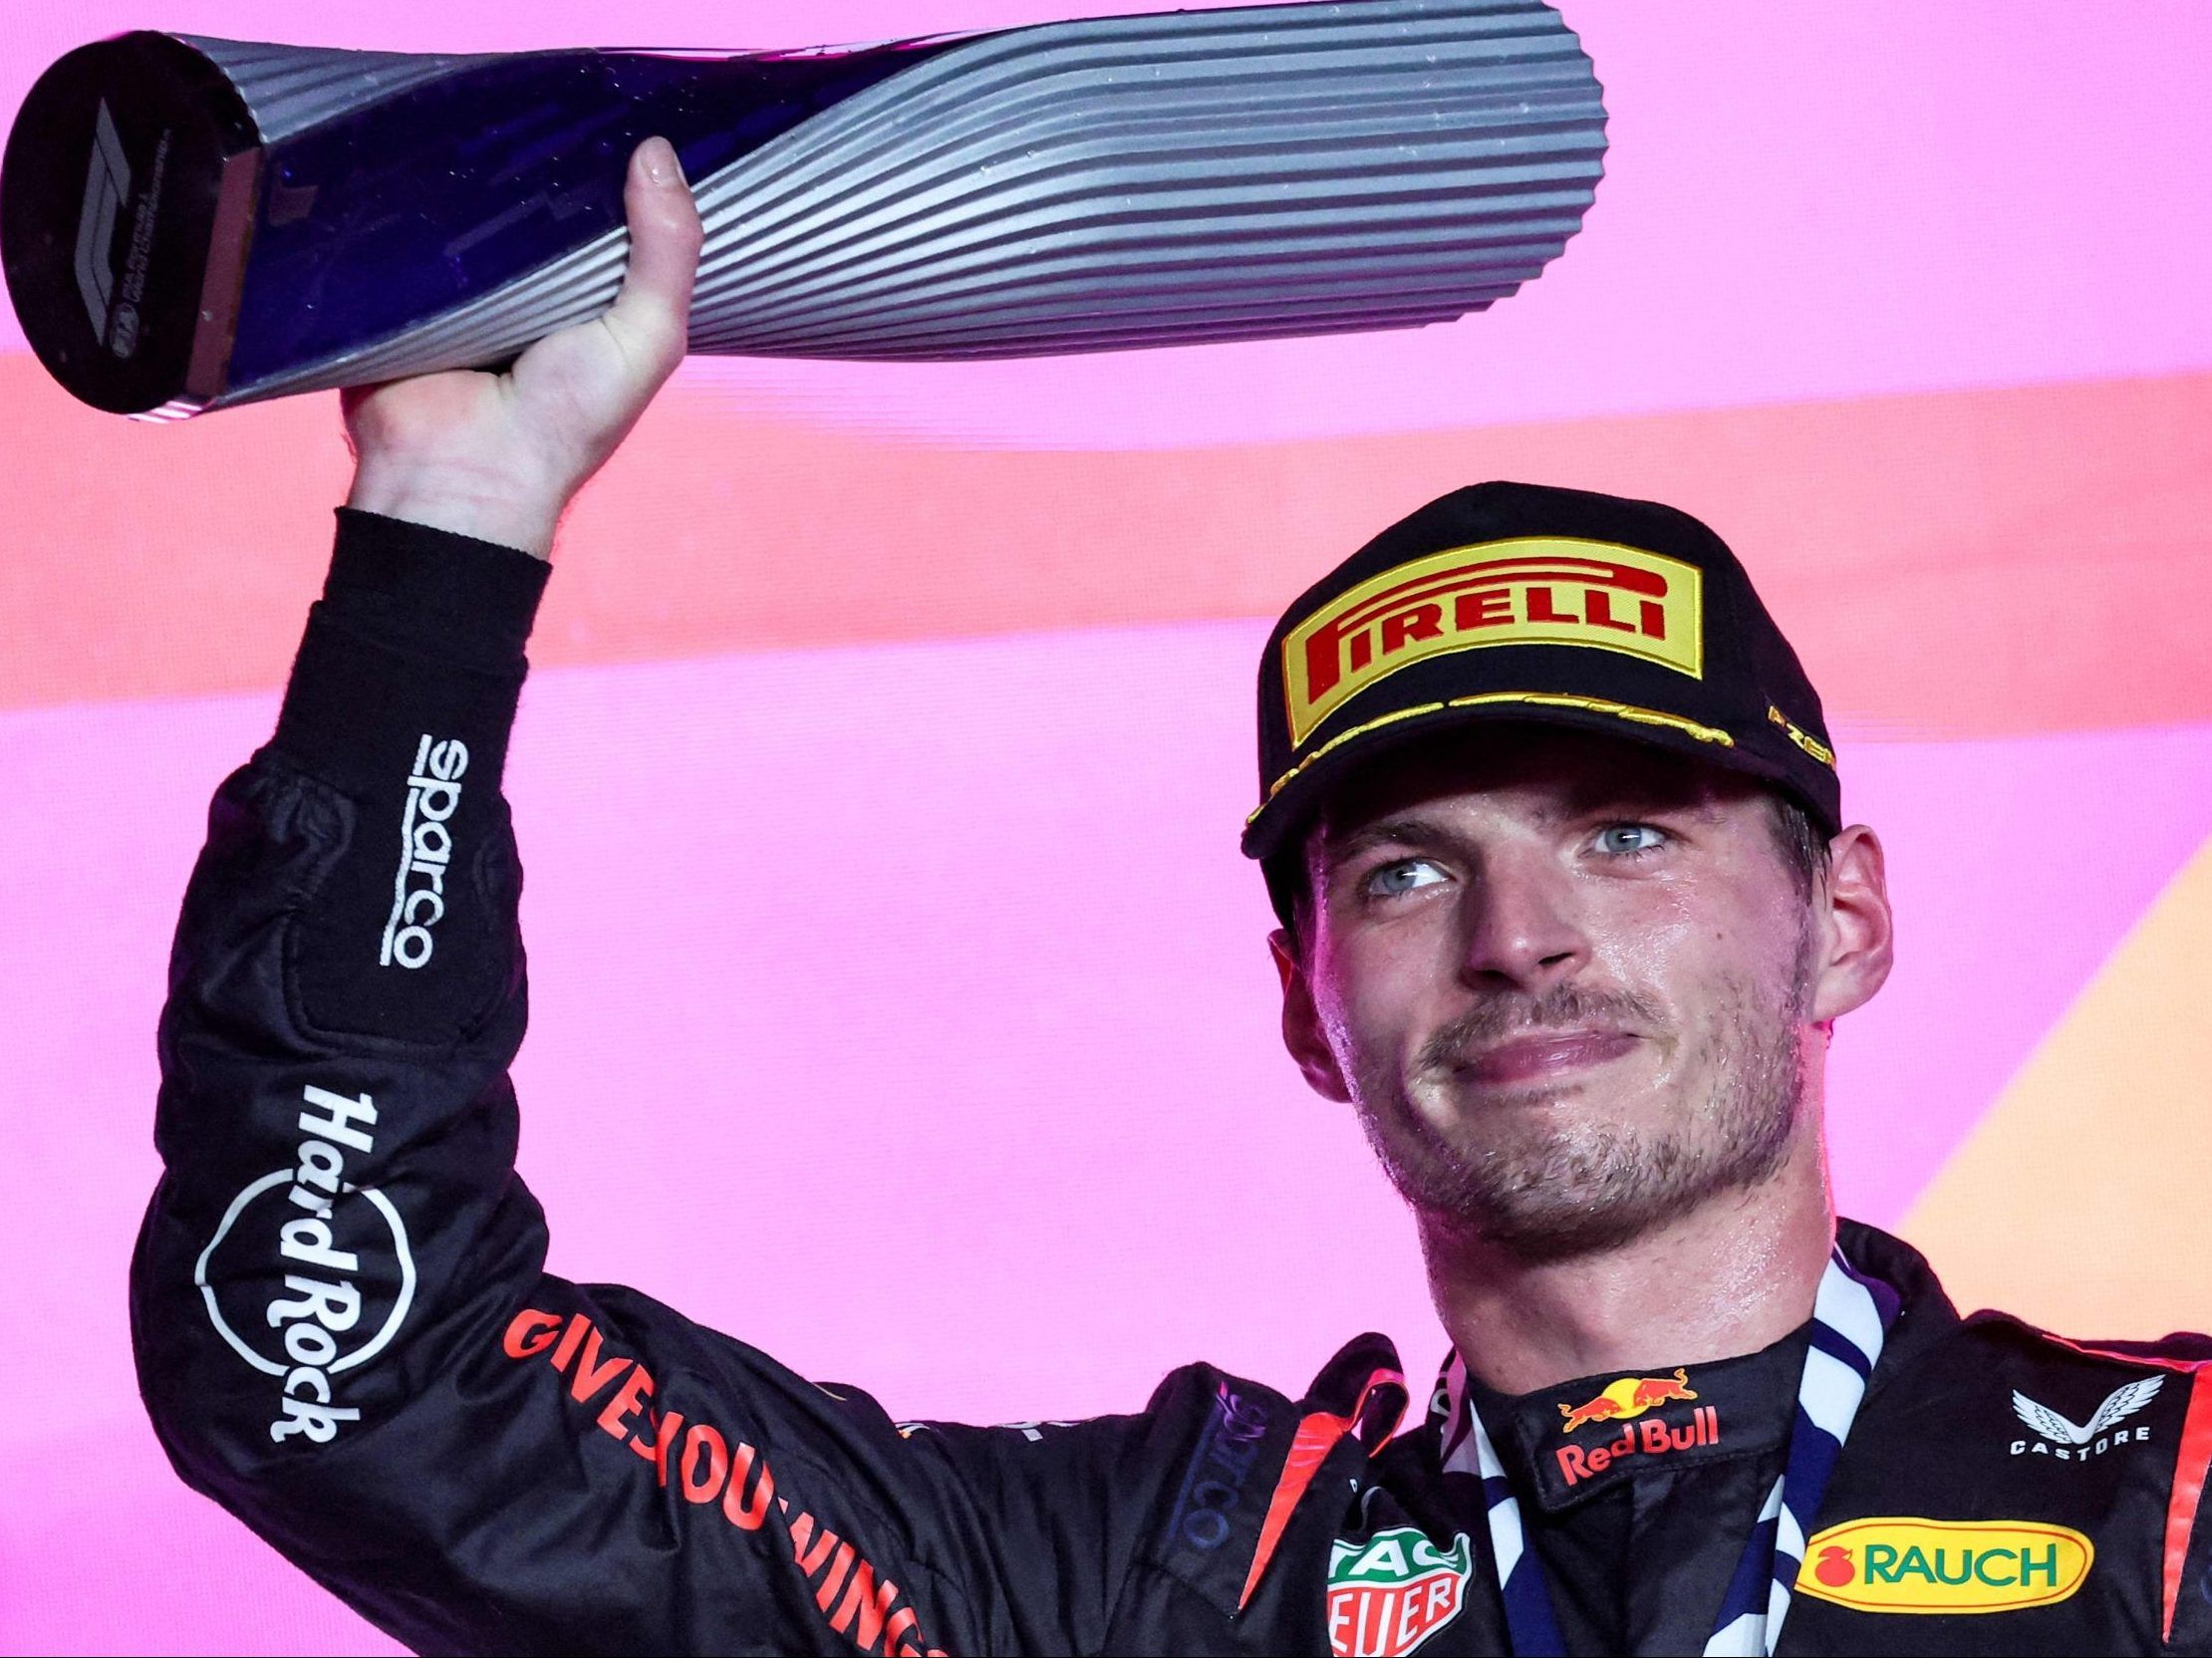 GALLERY: Max Verstappen receives F1 trophy as Lewis Hamilton skips awards 